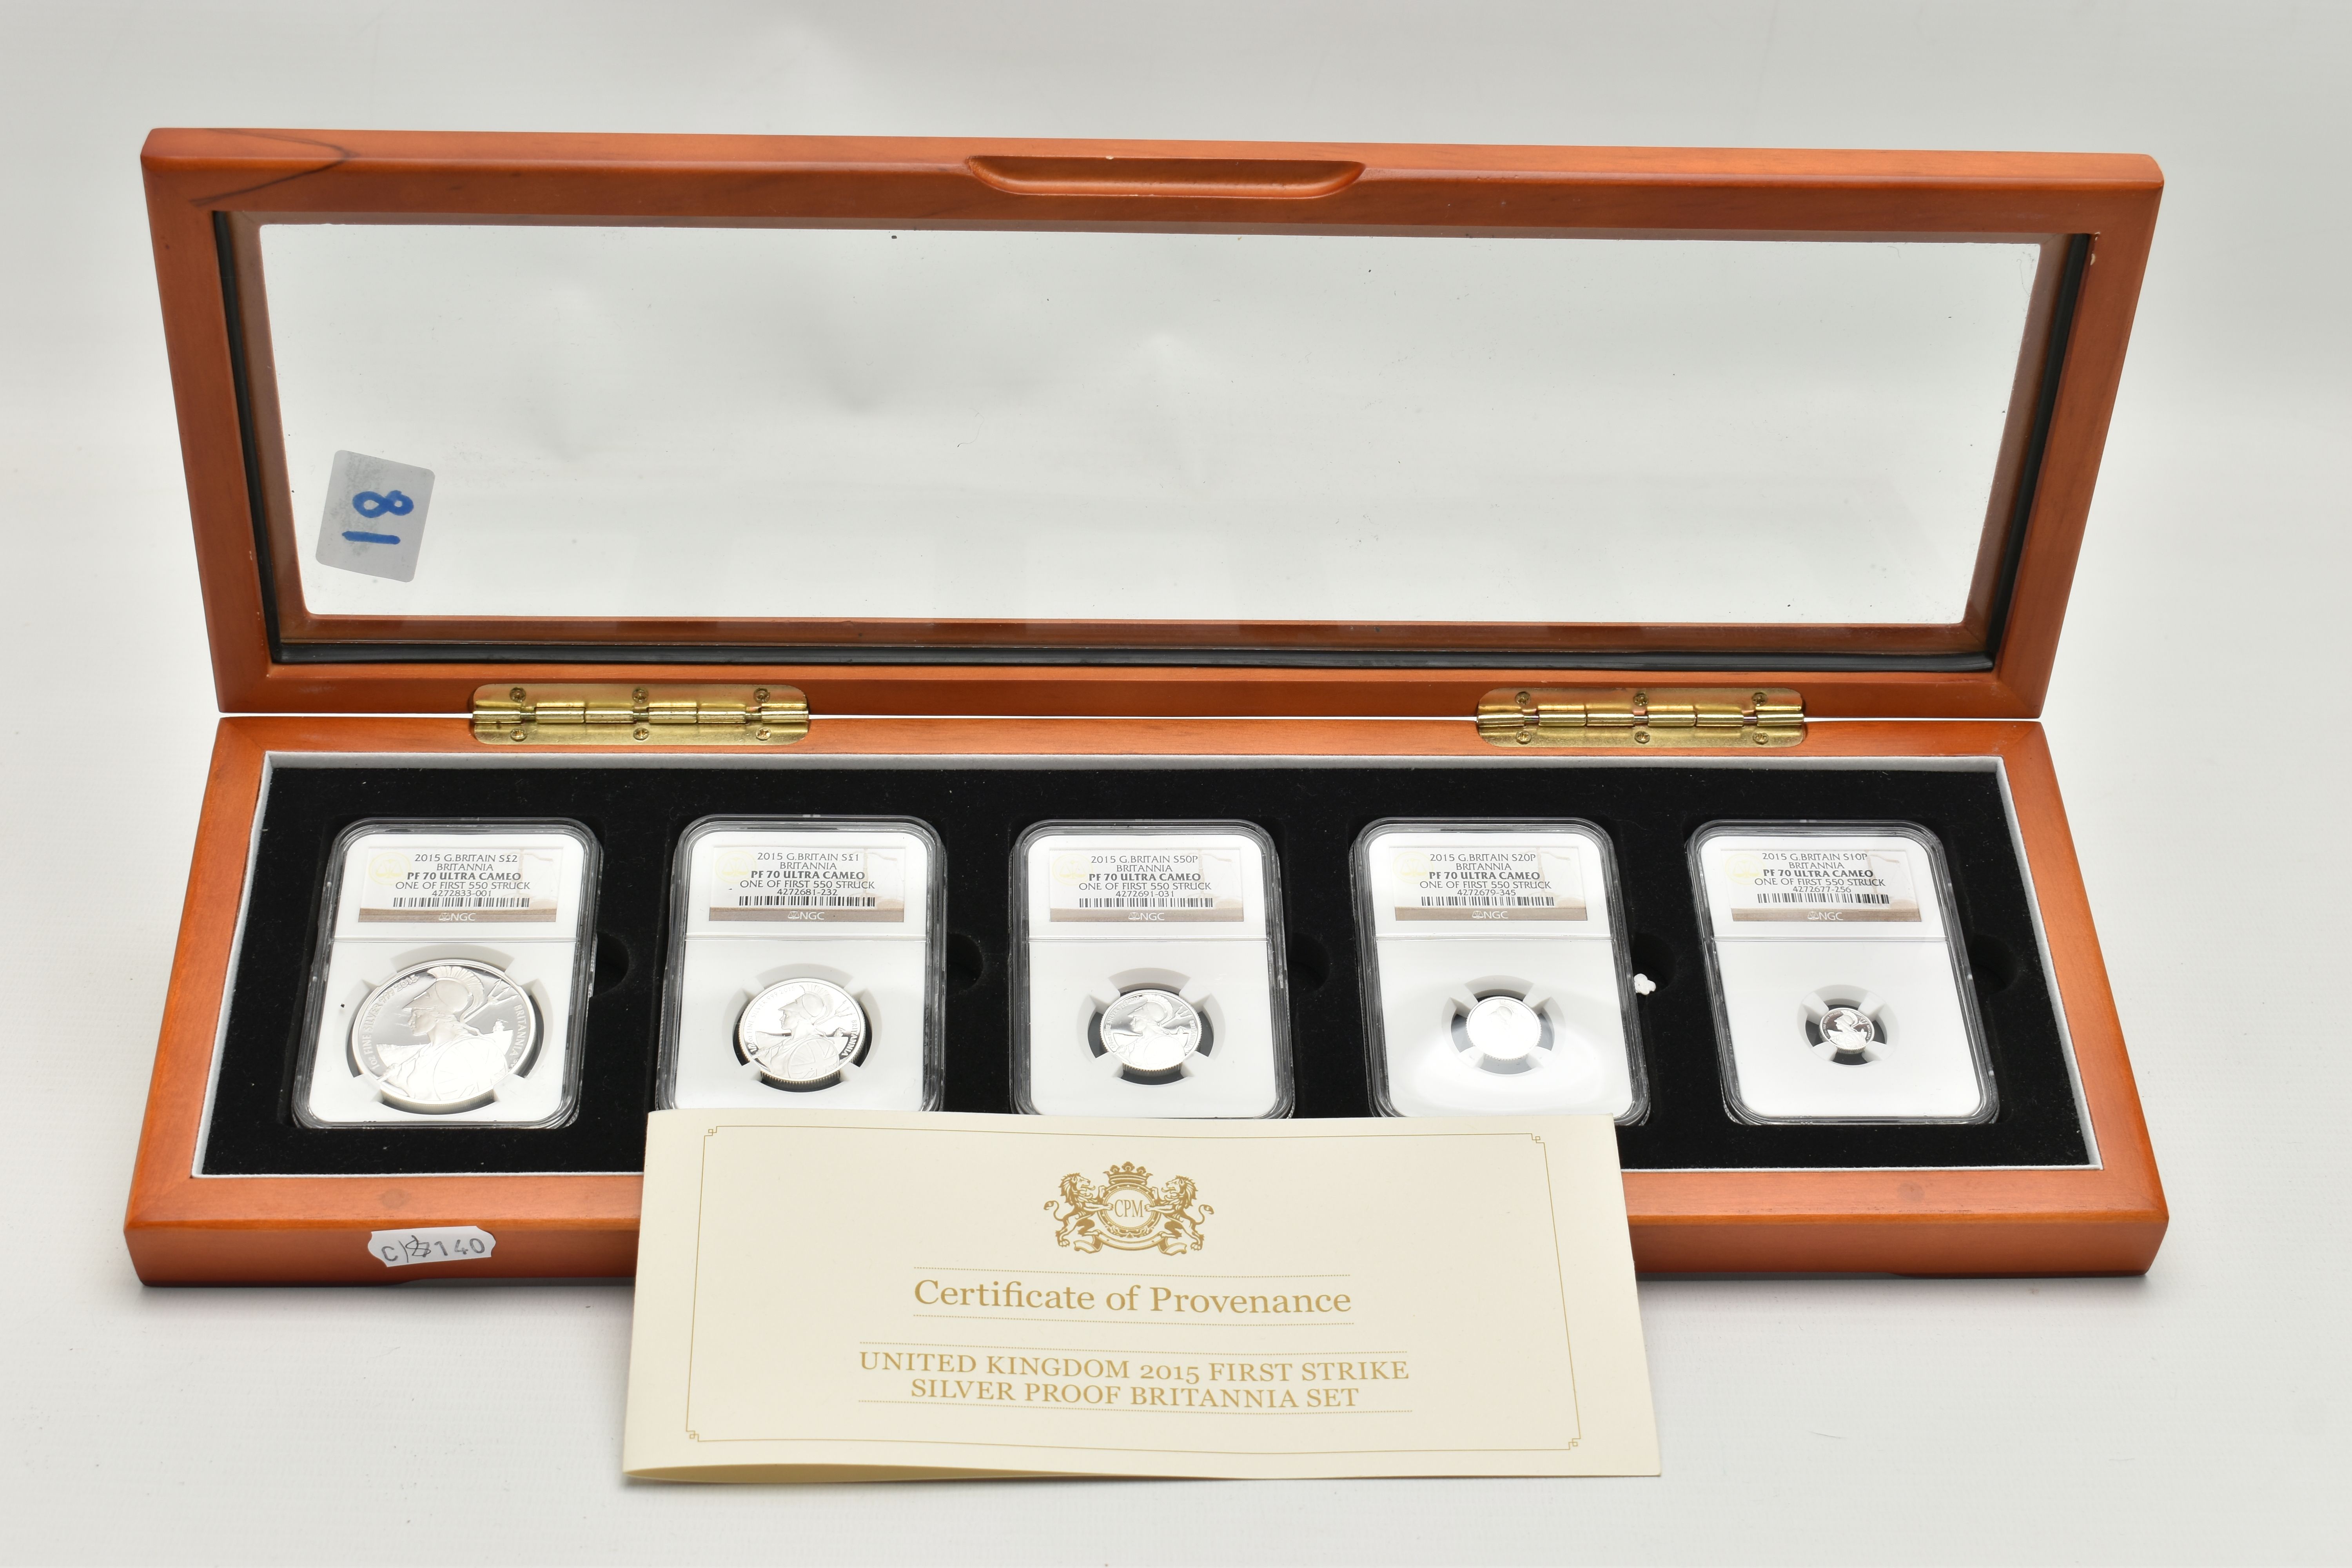 A UNITED KINGDOM 2015 FIRST STRIKE SILVER PROOF BRITANNIA SET, to include all coins slabbed and